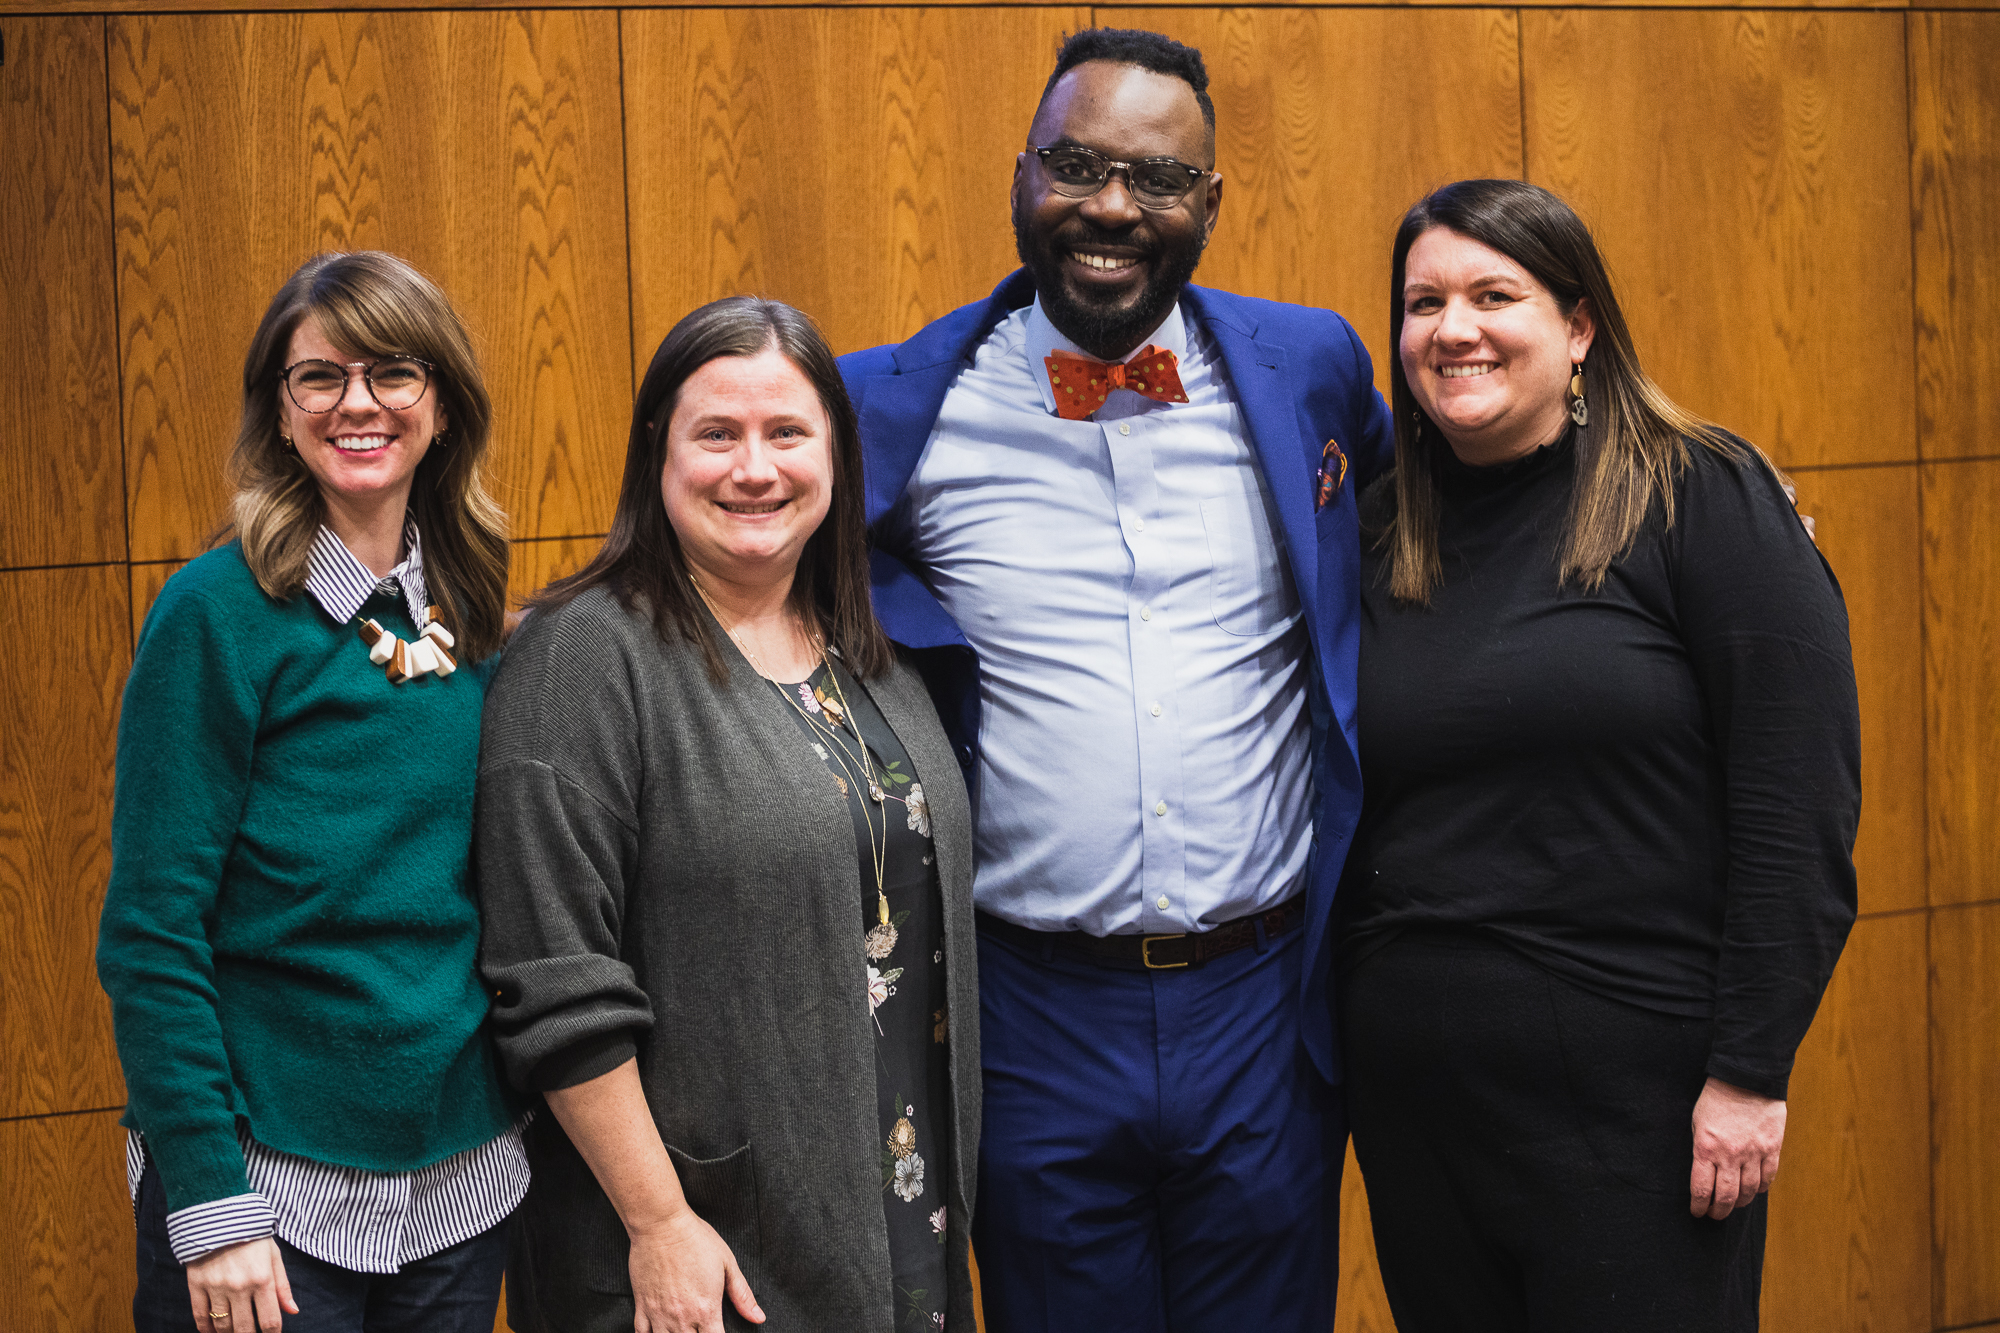 Guest speaker Dr. Marlon Johnson stands in a blue suit and orange polka-dot bow-tie with Master of Arts in Counseling faculty members, Dr. Courtney East, Dr. Andrea McGrath and Dr. Arden Szepe.